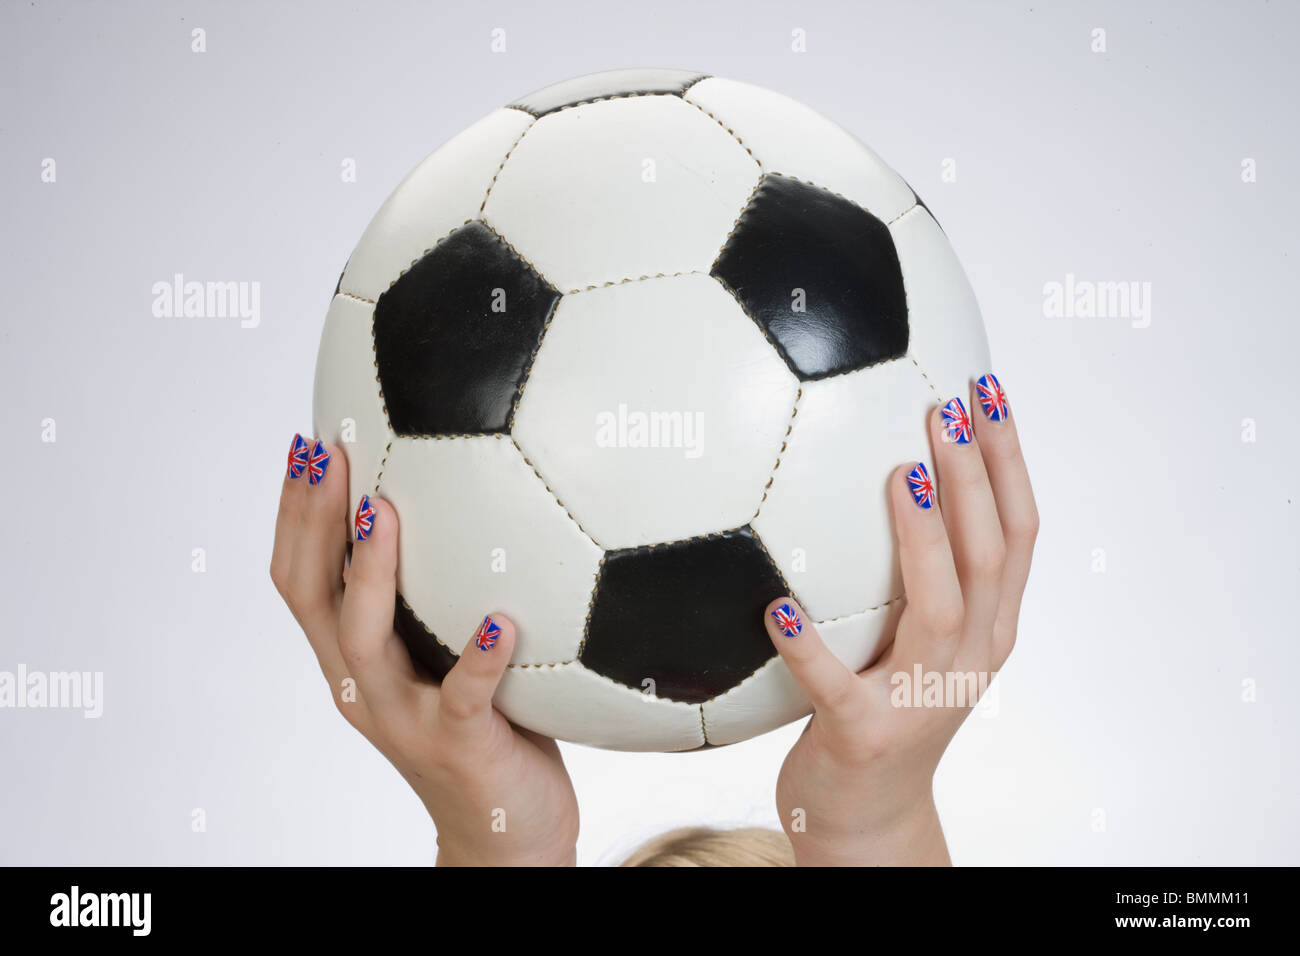 Hand with british flag painted on the fingernails holding a football Stock Photo